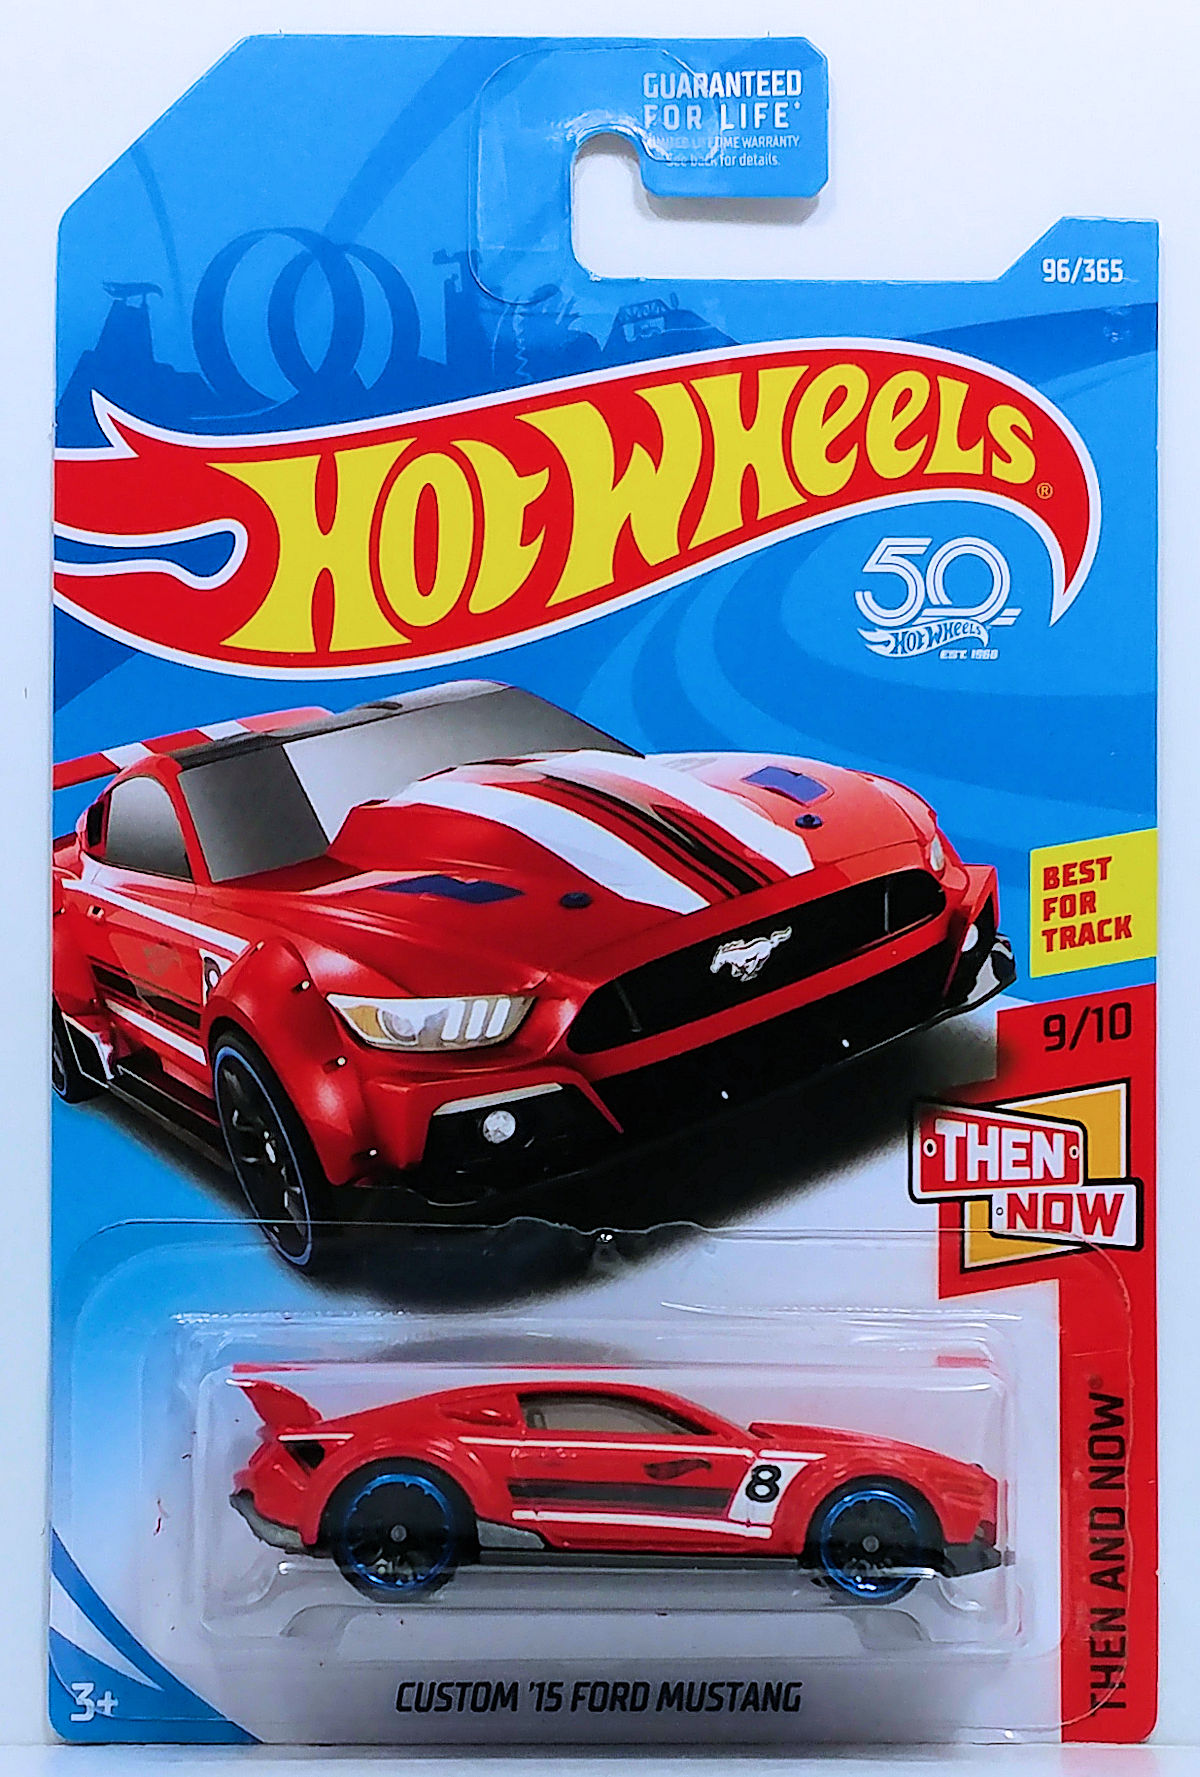 Hot Wheels Custom ‘15 Ford Mustang 199/365 Then And Now 9/10 